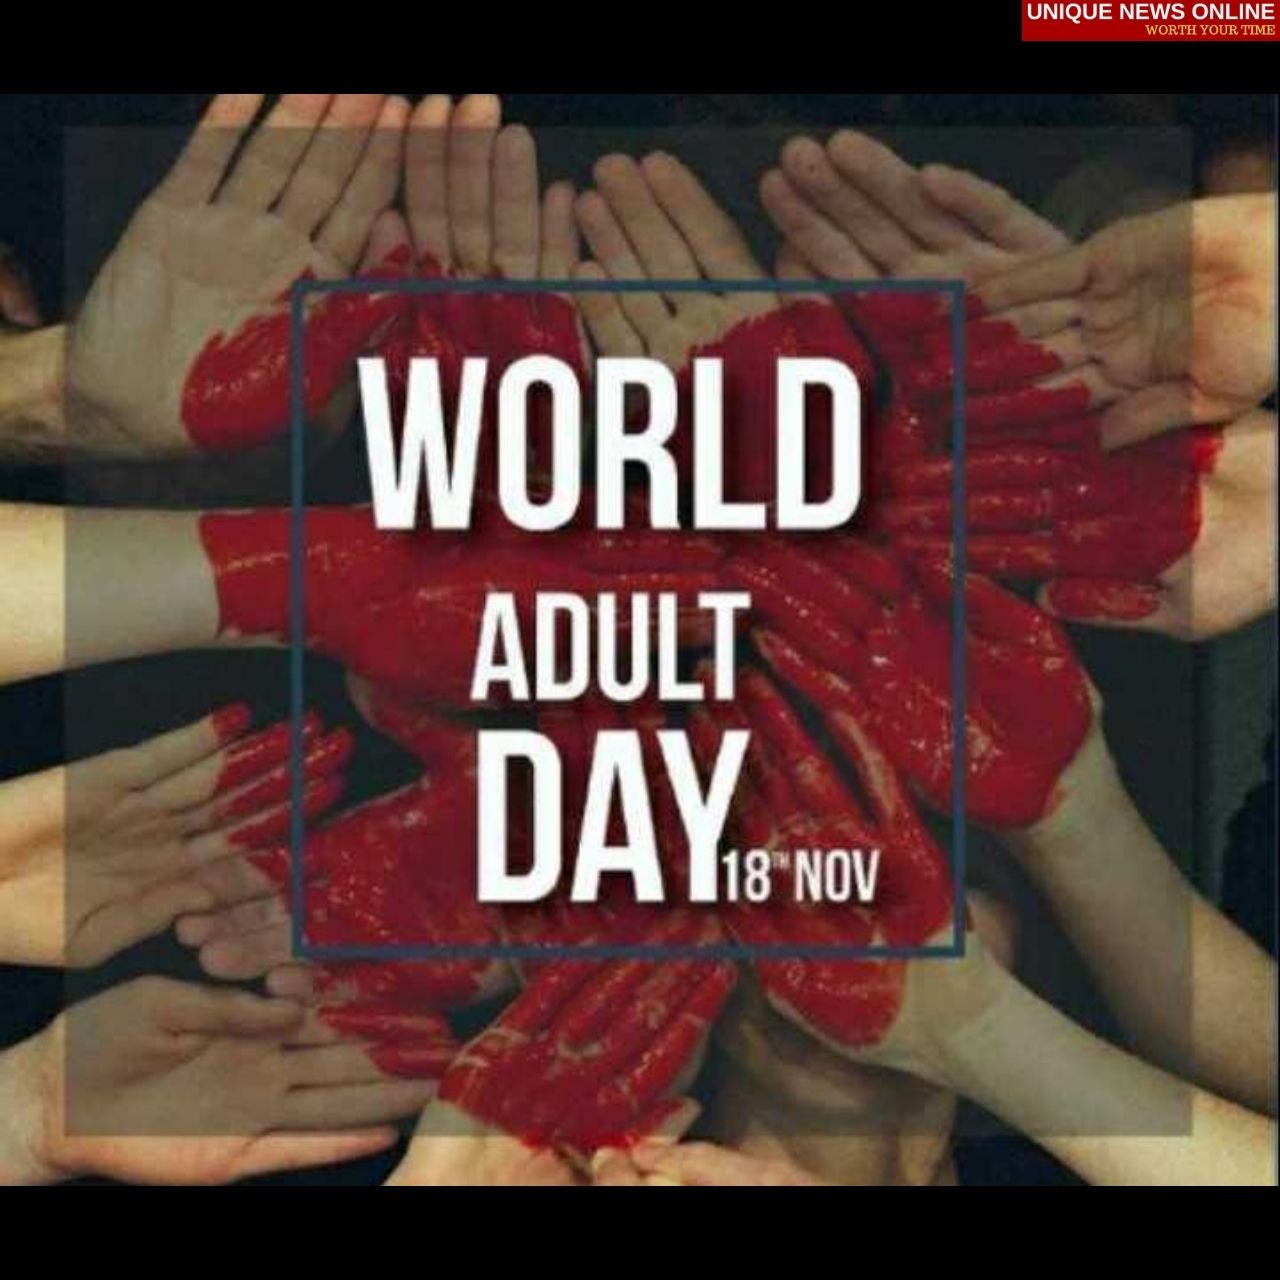 World Adult Day 2021 Quotes, HD Images, Messages, and Poster to Share